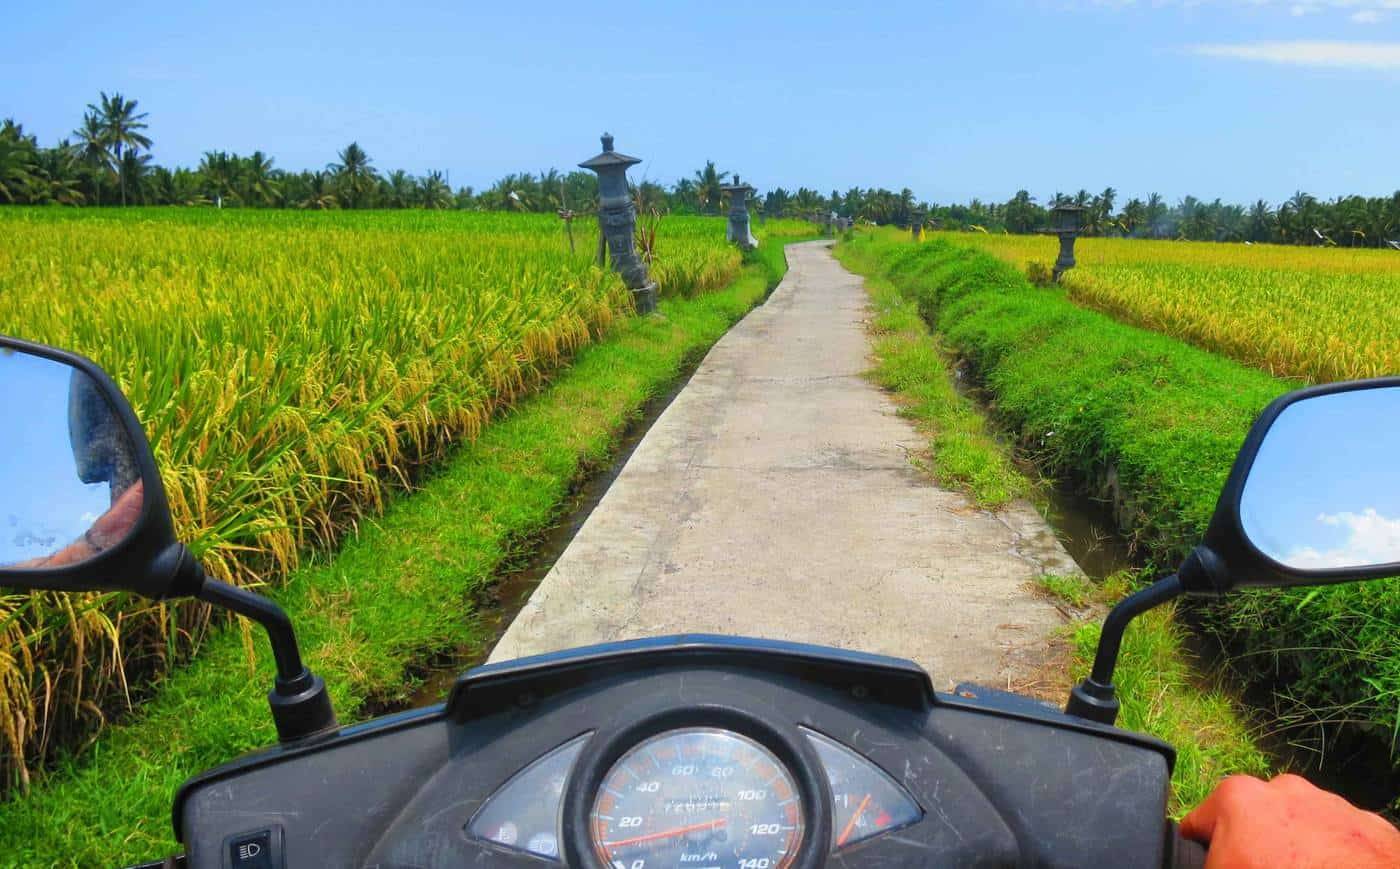 BALI BY SCOOTER IN 9 DAYS